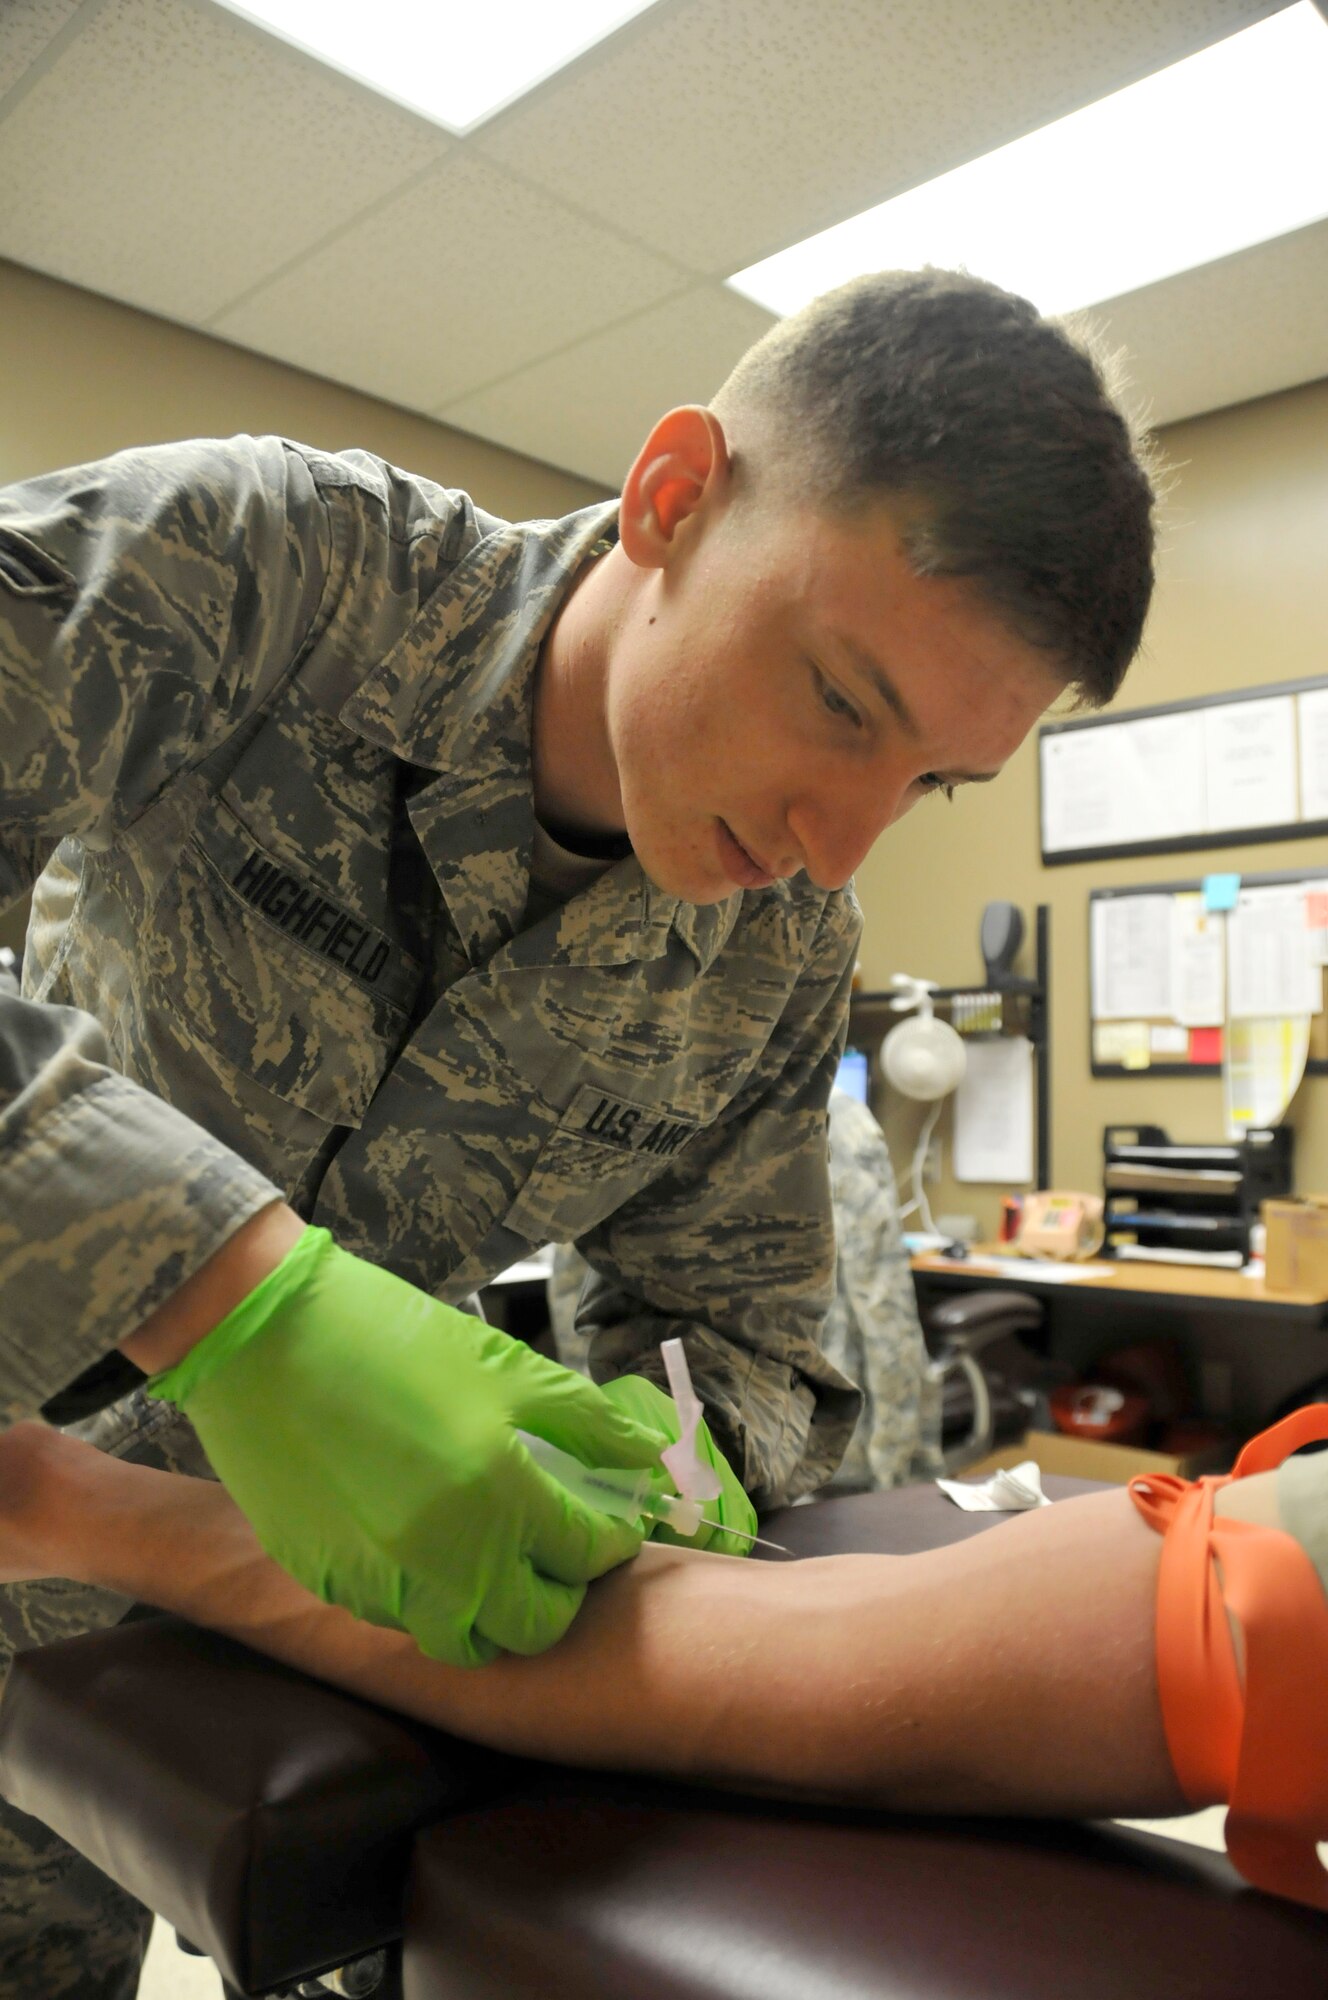 Airman 1st Class Bryant Highfield, 188th Medical Group aerospace medical technician, prepares to draw blood from a fellow 188th Airman in the MDG laboratory at Ebbing Air National Guard Base, Fort Smith, Ark., during the April unit training assembly, April 11, 2015. Highfield's superiors and peers noted his exceptional work ethic, leading to his selection as the May 2015 The Flying Razorback spotlight. (U.S. Air National Guard photo by Staff Sgt. John Suleski/released)